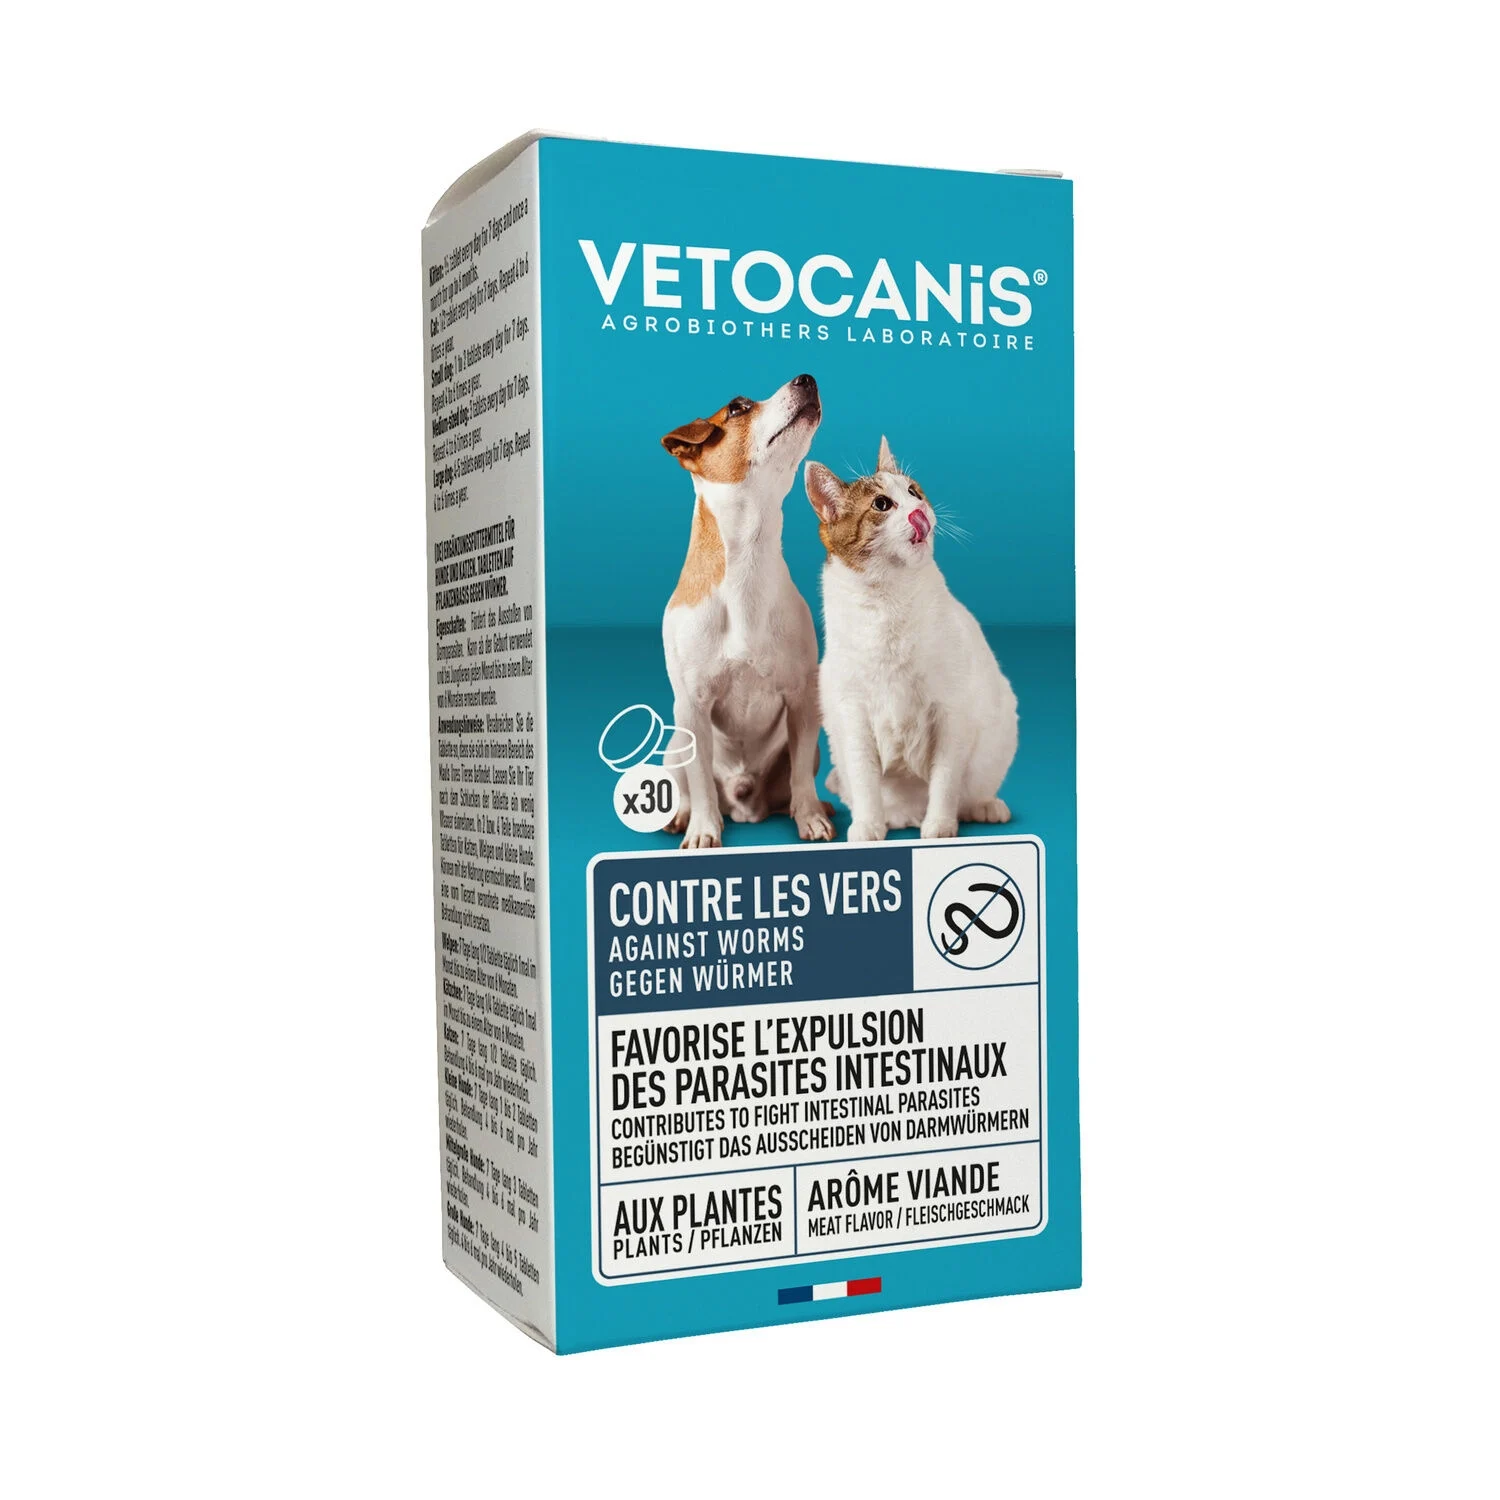 Canifuxe Tablet, Purge For Dogs And Cats Against Worms - Vetocanis